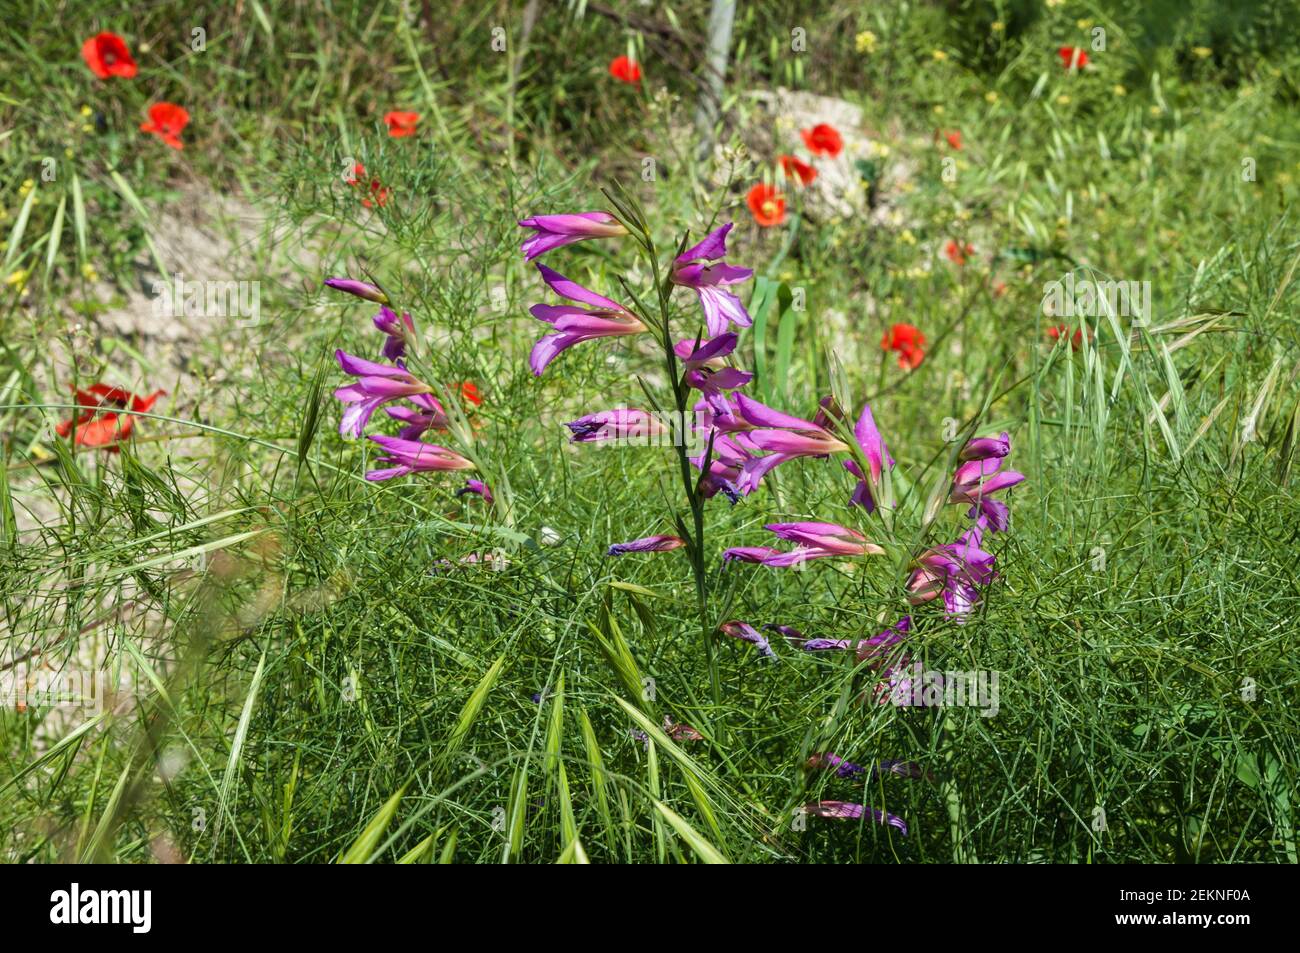 https://c8.alamy.com/comp/2EKNF0A/close-up-of-wildflowers-and-poppies-on-green-background-on-summer-sunny-day-2EKNF0A.jpg